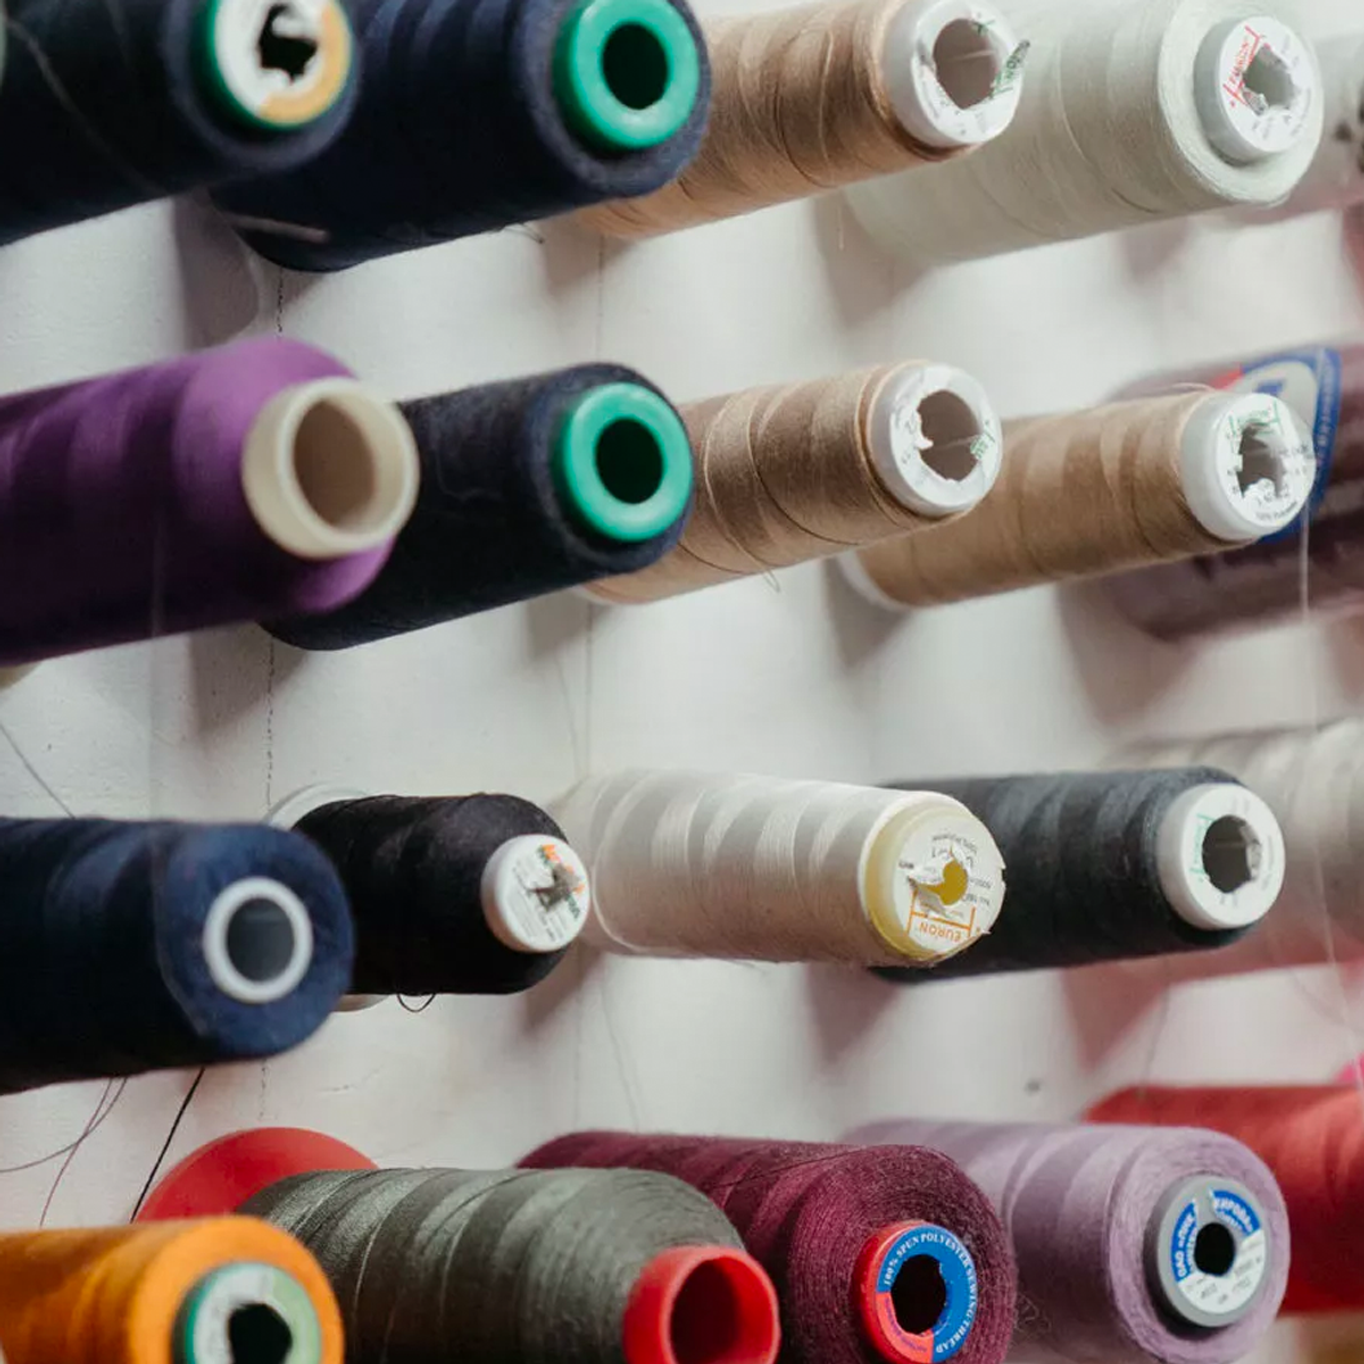 6 Types of THREAD!  The Right Thread for your Sewing Project